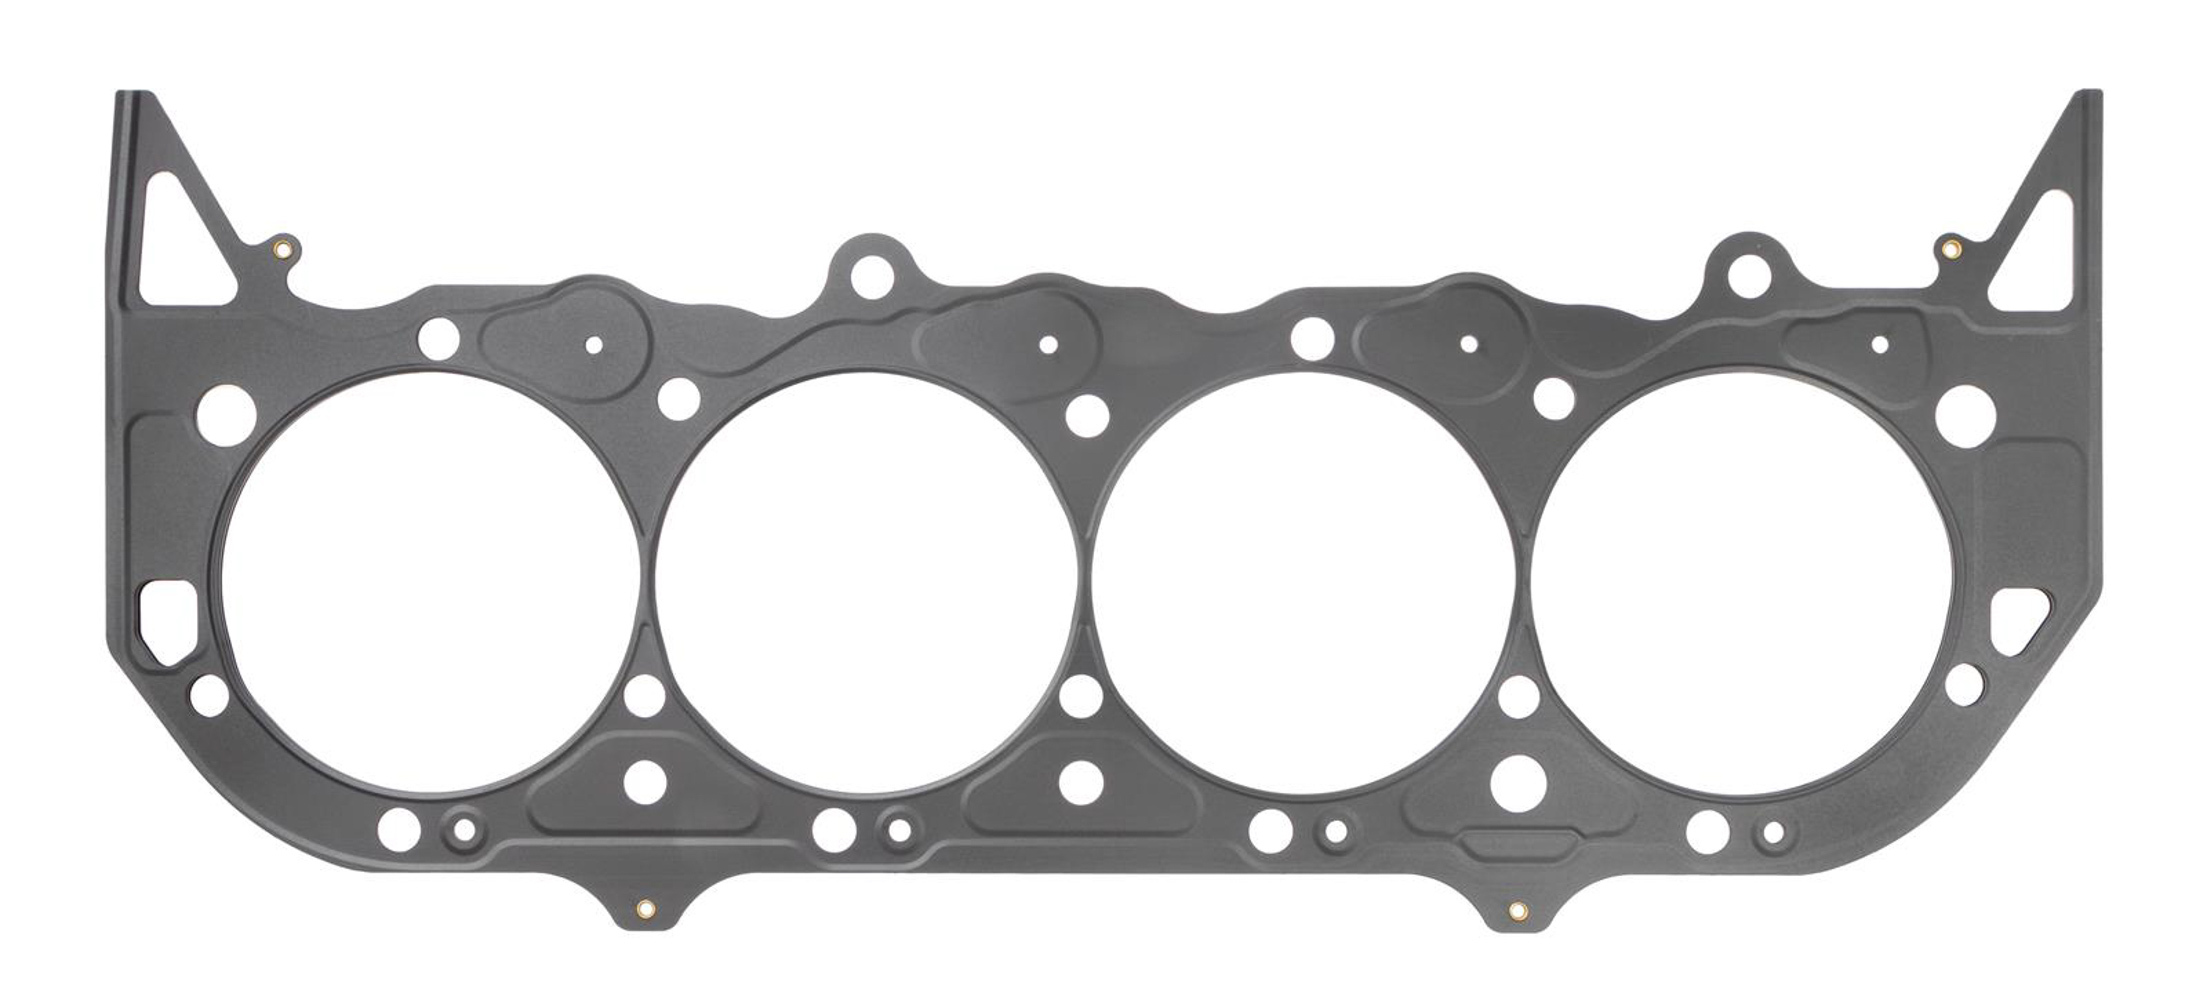 SCE Gaskets M145439 - Cylinder Head Gasket, MLS Spartan, 4.540 in Bore, 0.039 in Compression Thickness, Multi-Layer Steel, Big Block Chevy, Each